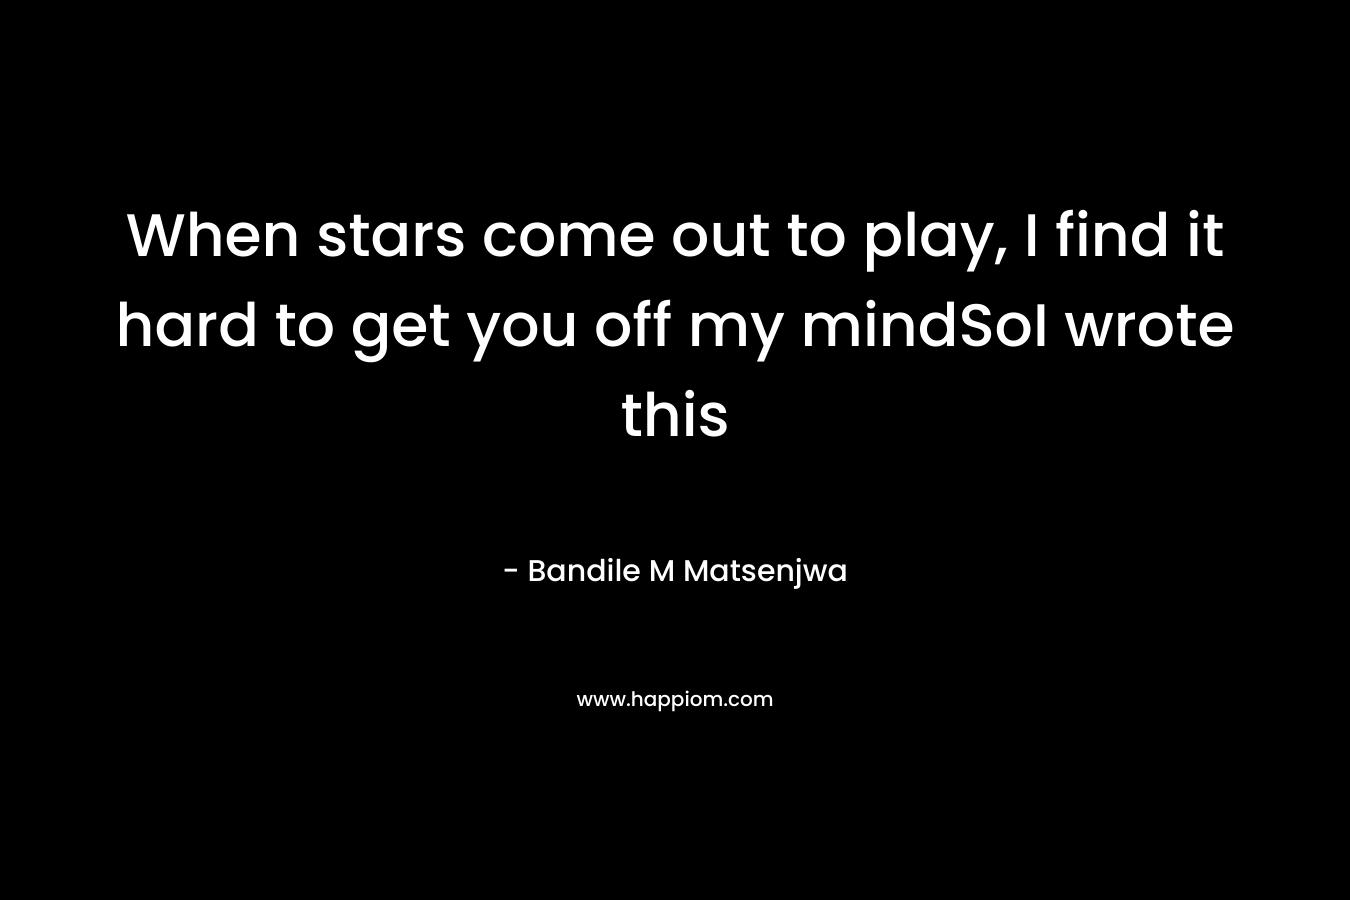 When stars come out to play, I find it hard to get you off my mindSoI wrote this